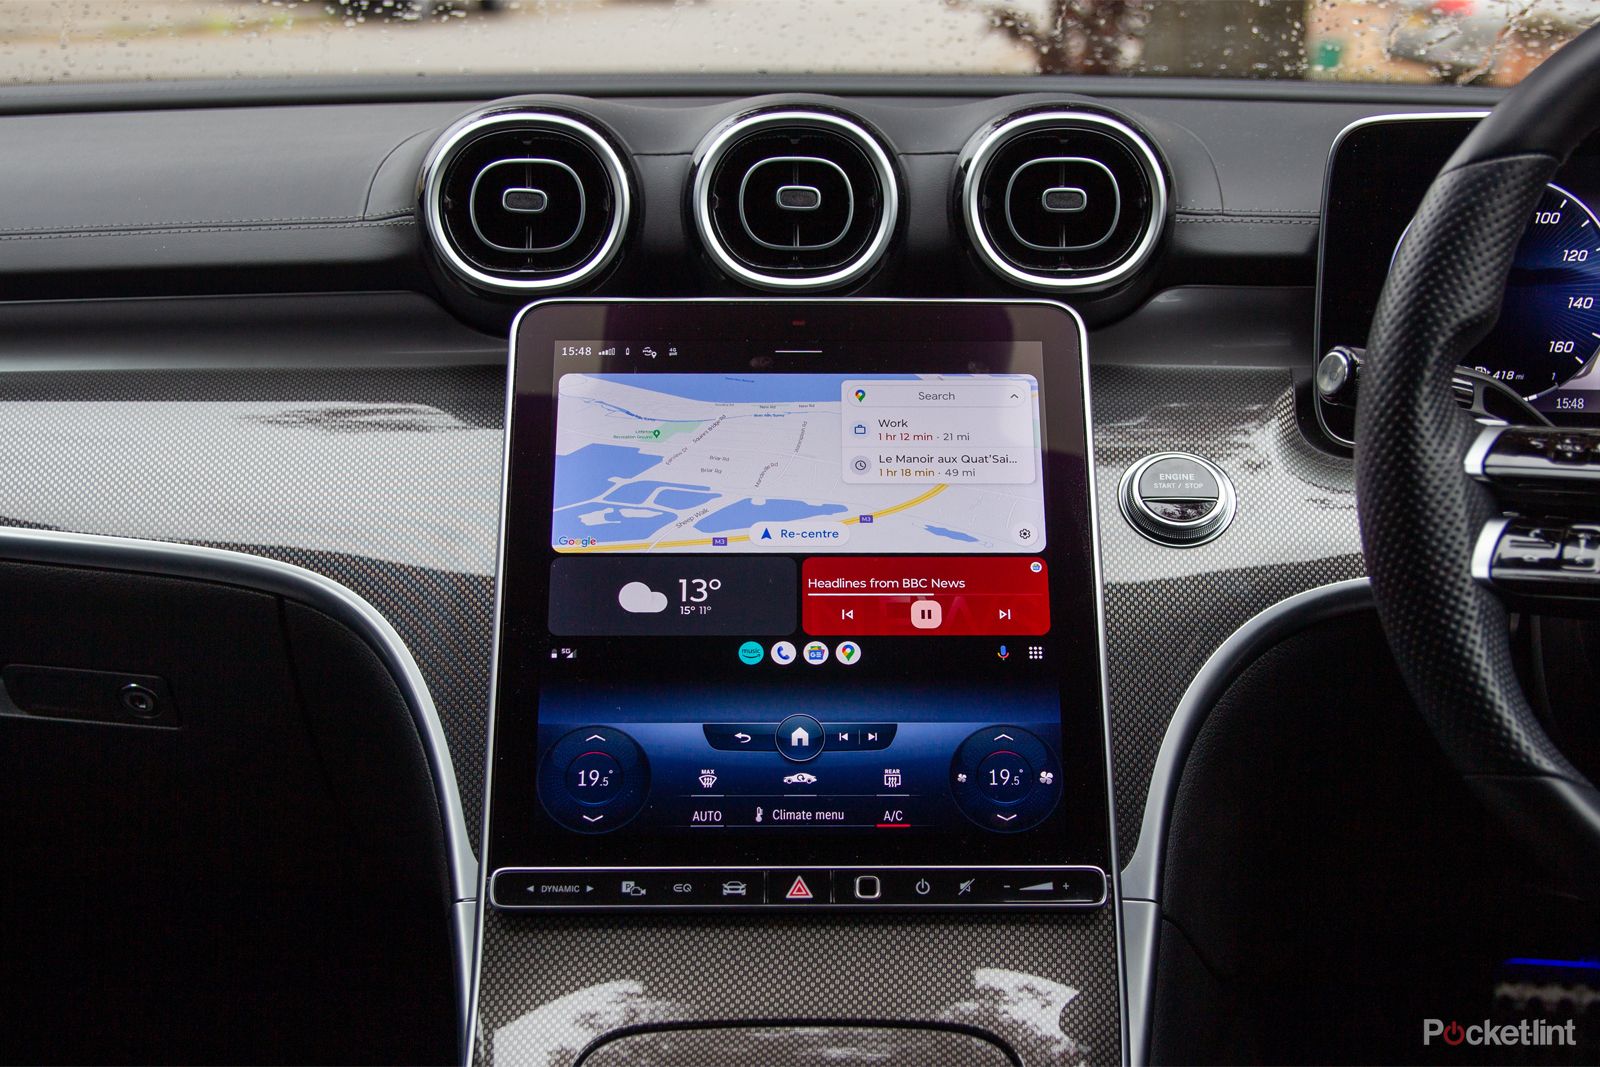 What is Android Auto? Full review and user guide